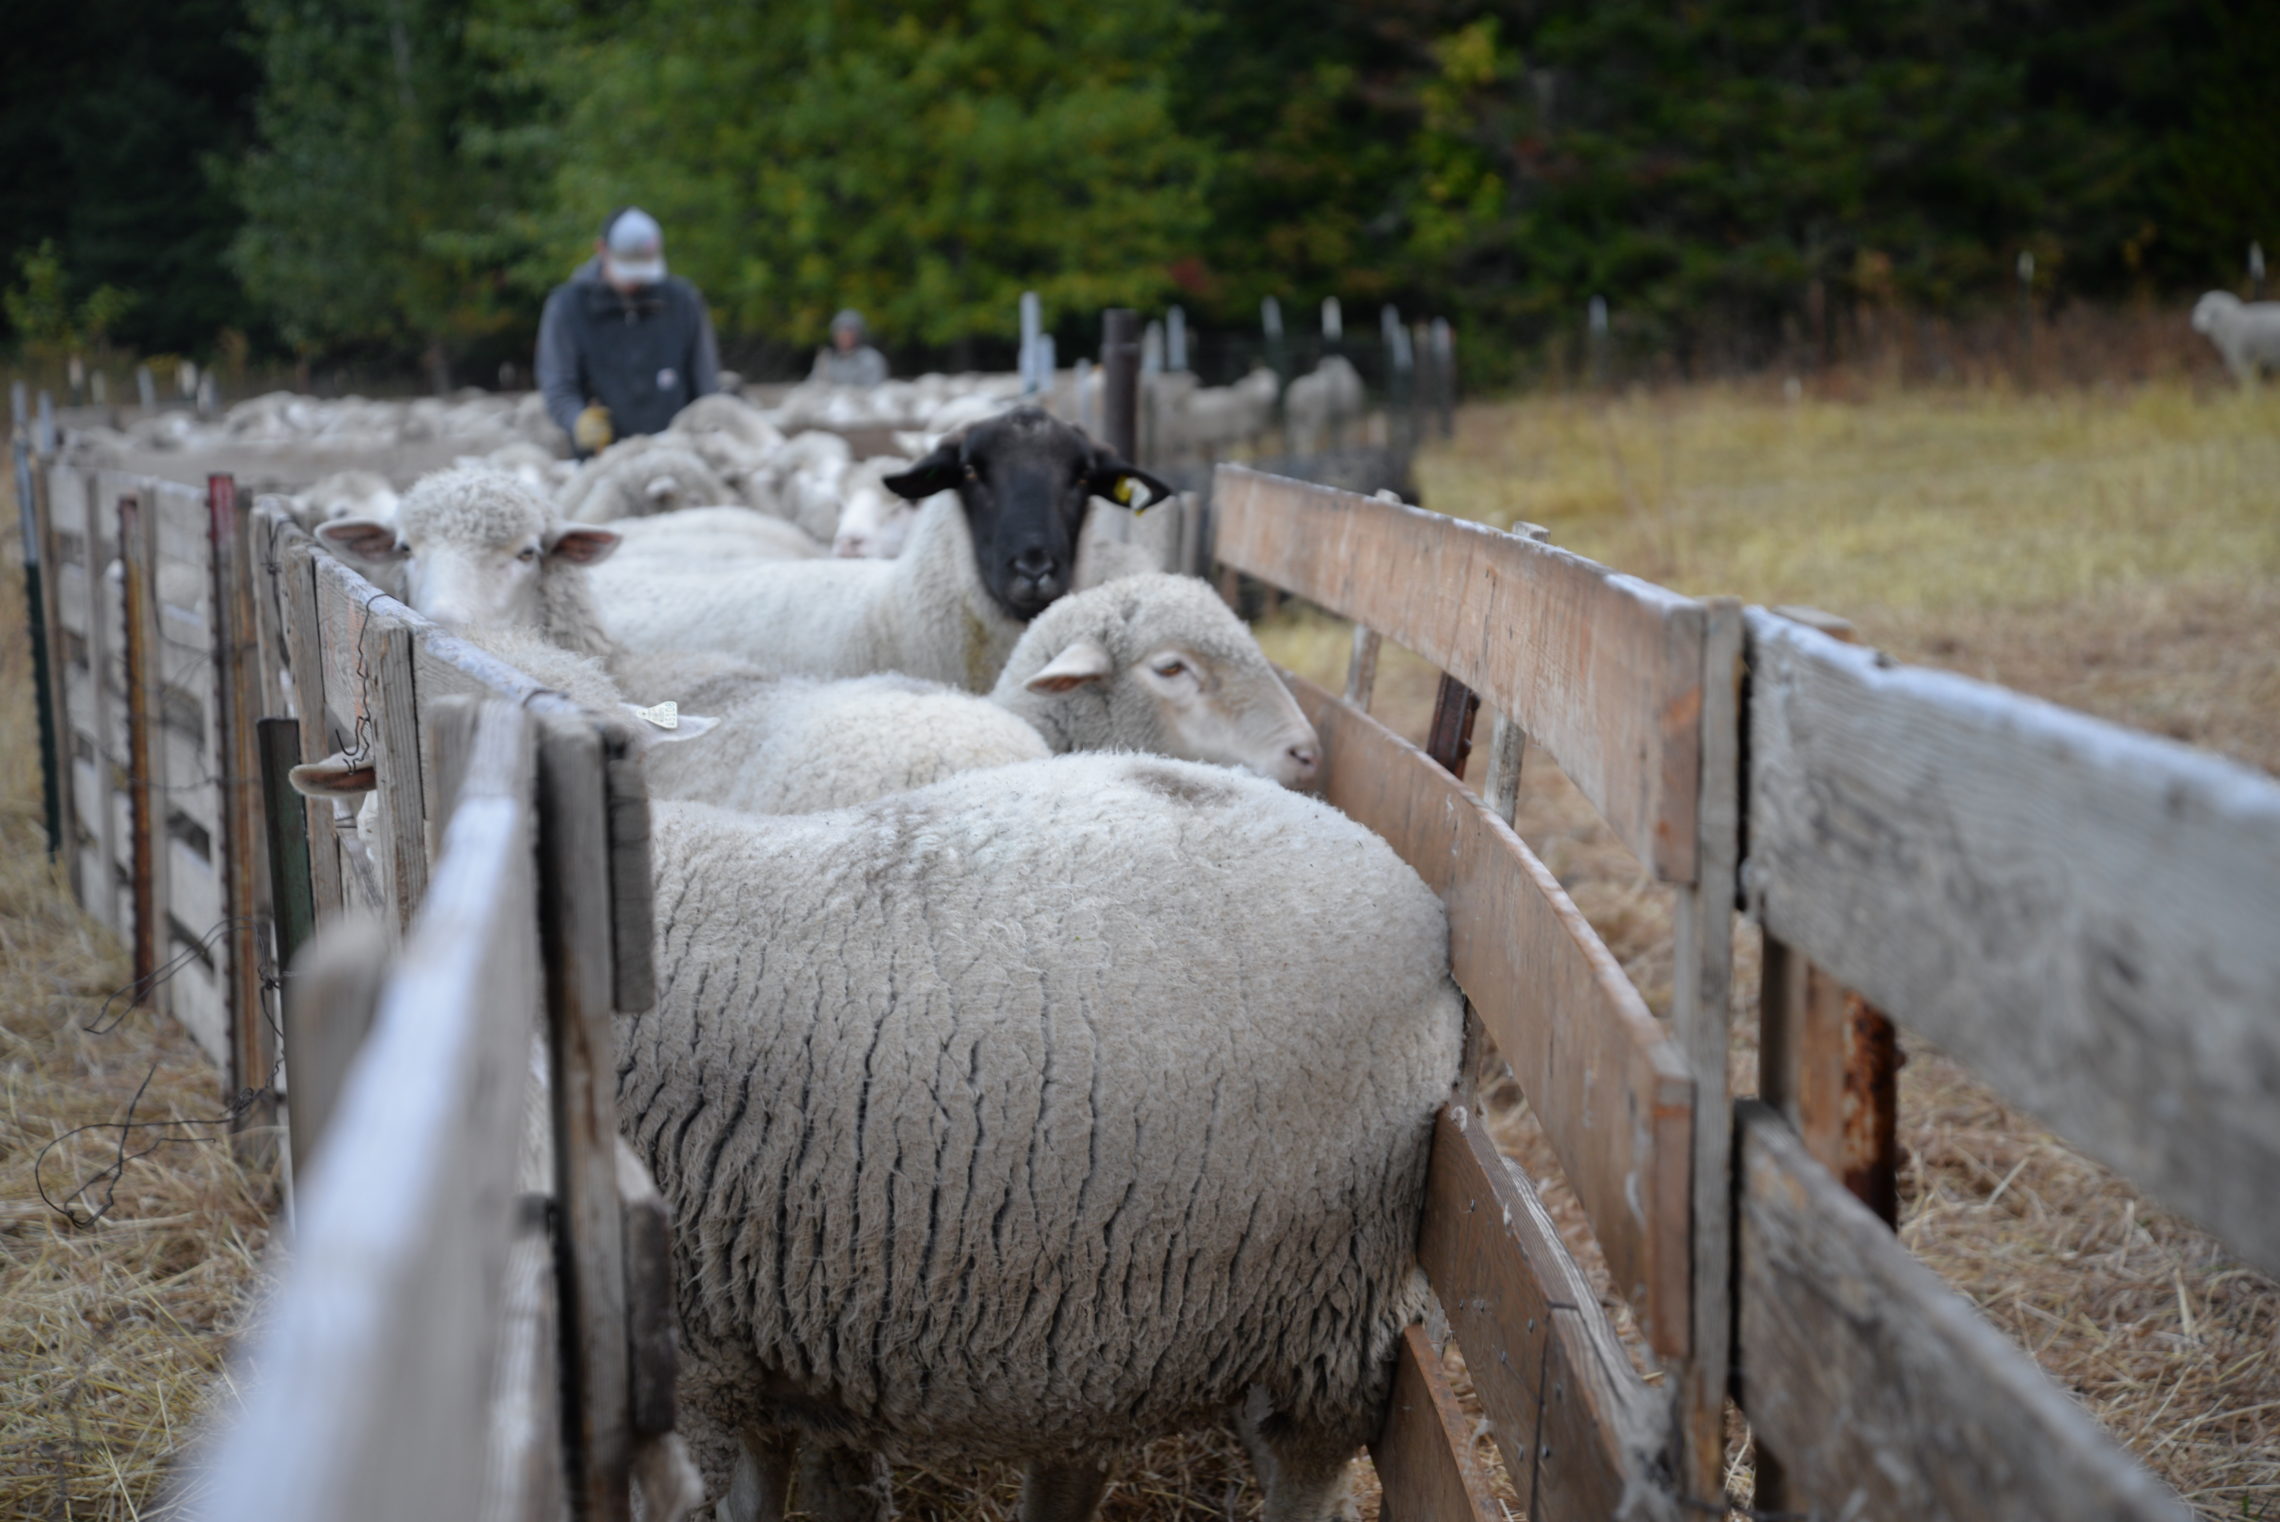 Sheep wait in single file line to board a trailer. They’ll travel over 150 miles in one day to graze on the green, irrigated pastures of Central Washington. CREDIT: ESMY JIMENEZ